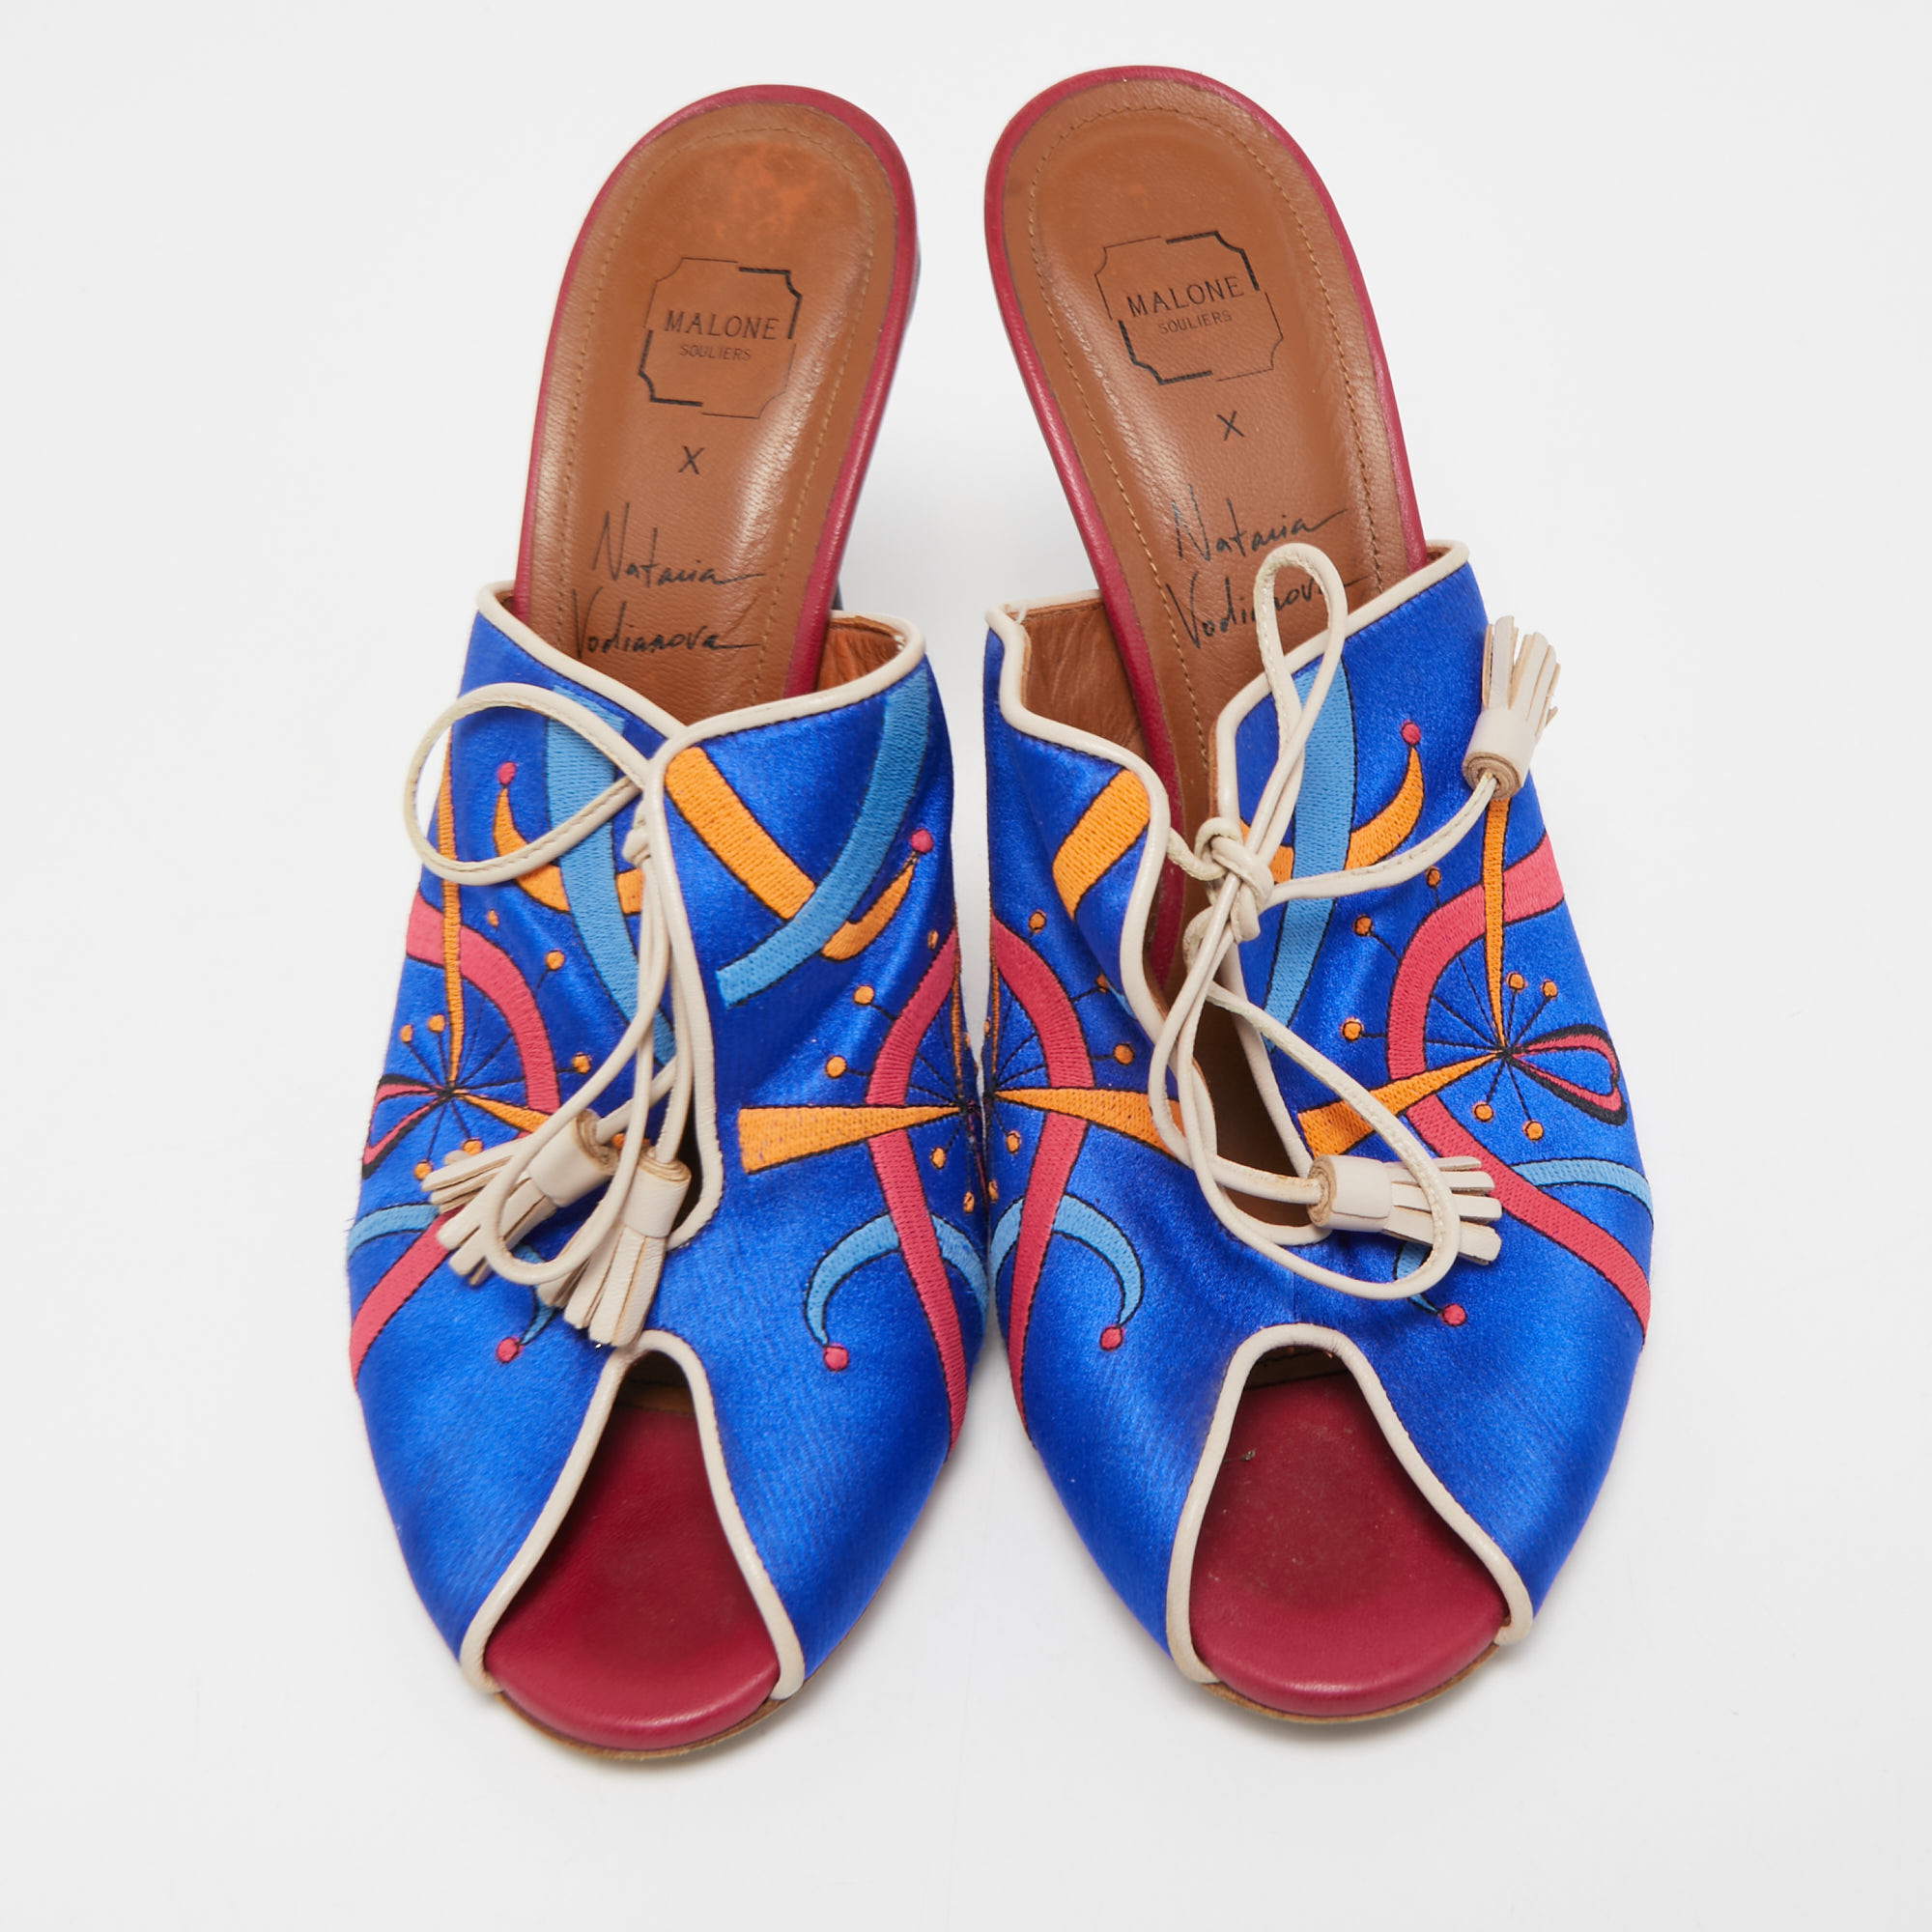 Malone Souliers Blue Embroidered Satin Peep Toe Lace Up Mules Size 40